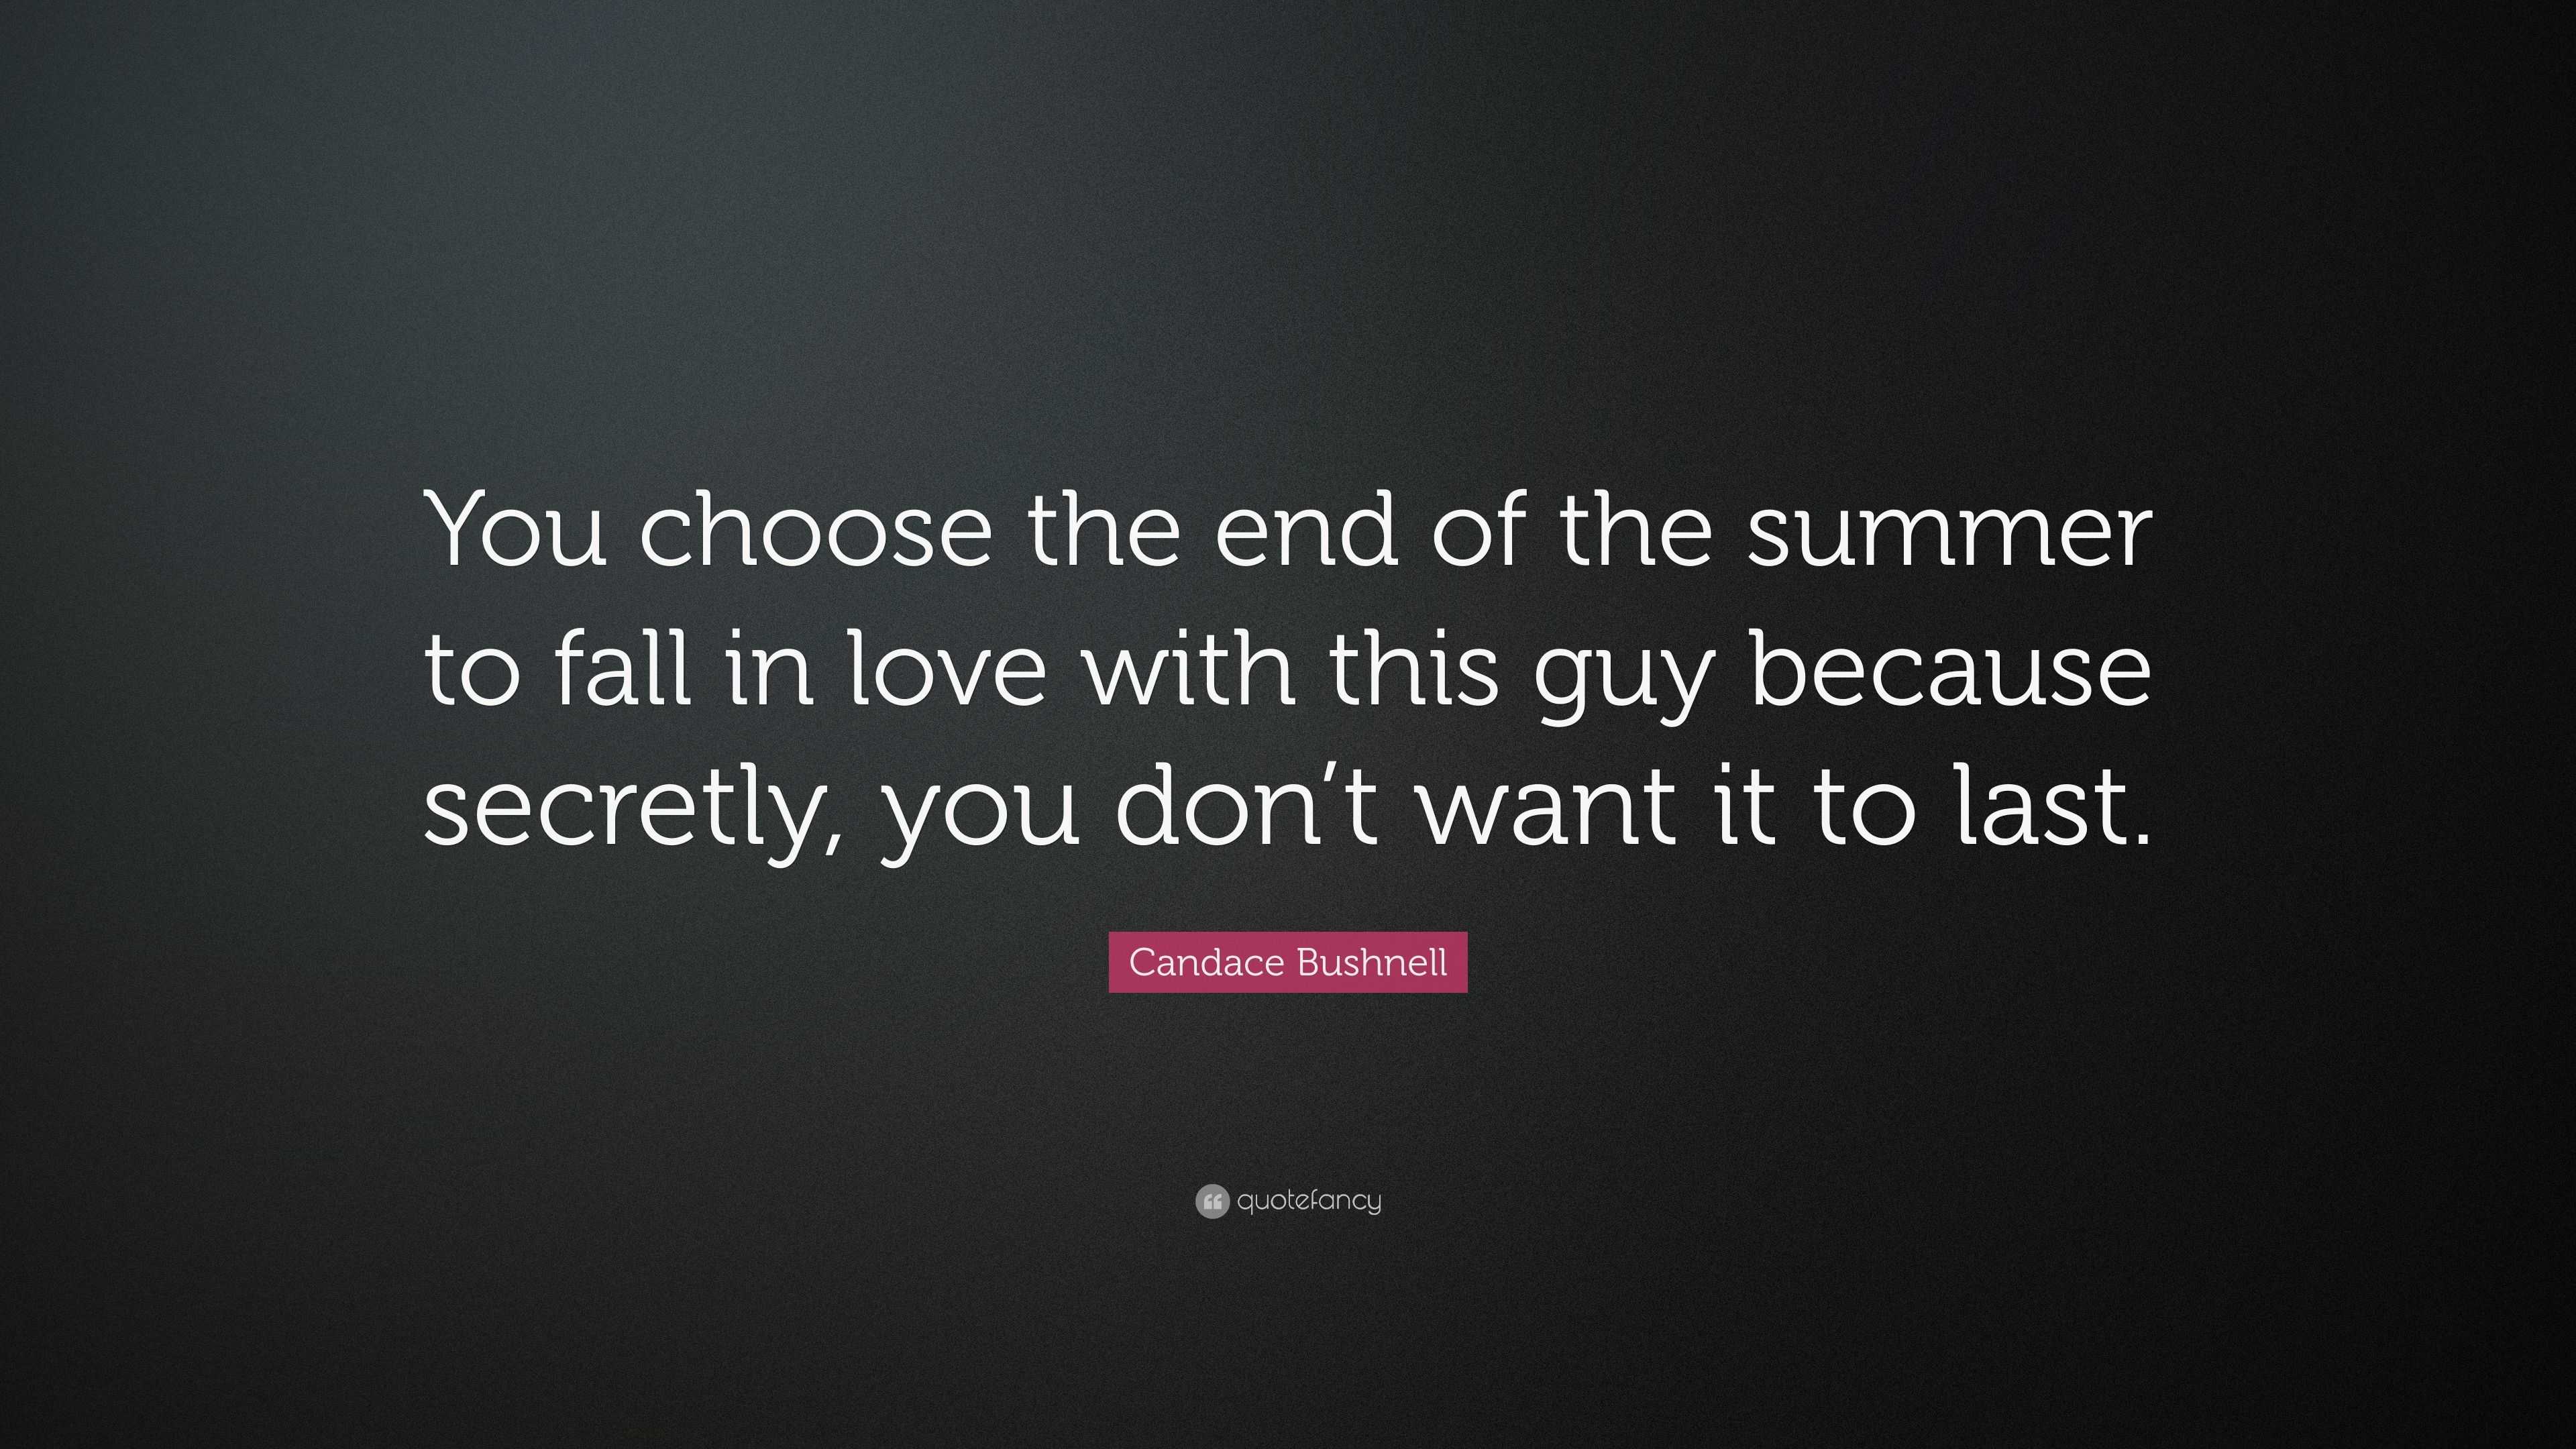 Candace Bushnell Quote “You choose the end of the summer to fall in love